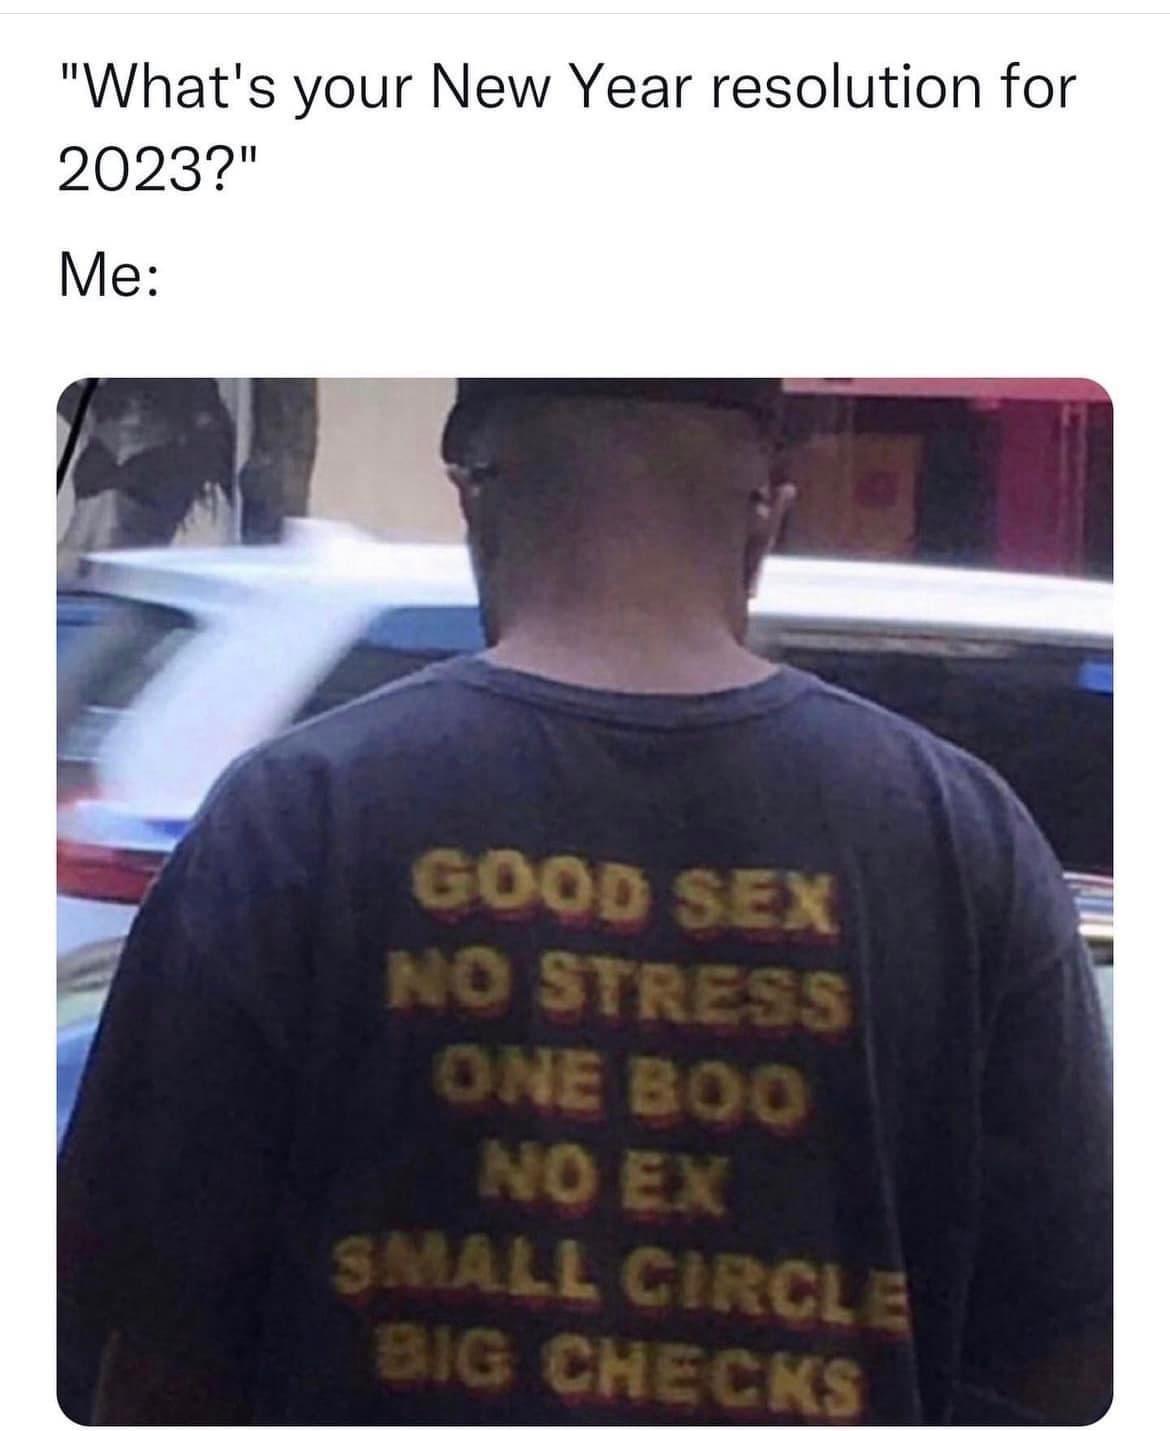 funny memems and tweetst shirt - "What's your New Year resolution for 2023?" Me Good Sex No Stress One Boo No Ex Small Circle Big Checks